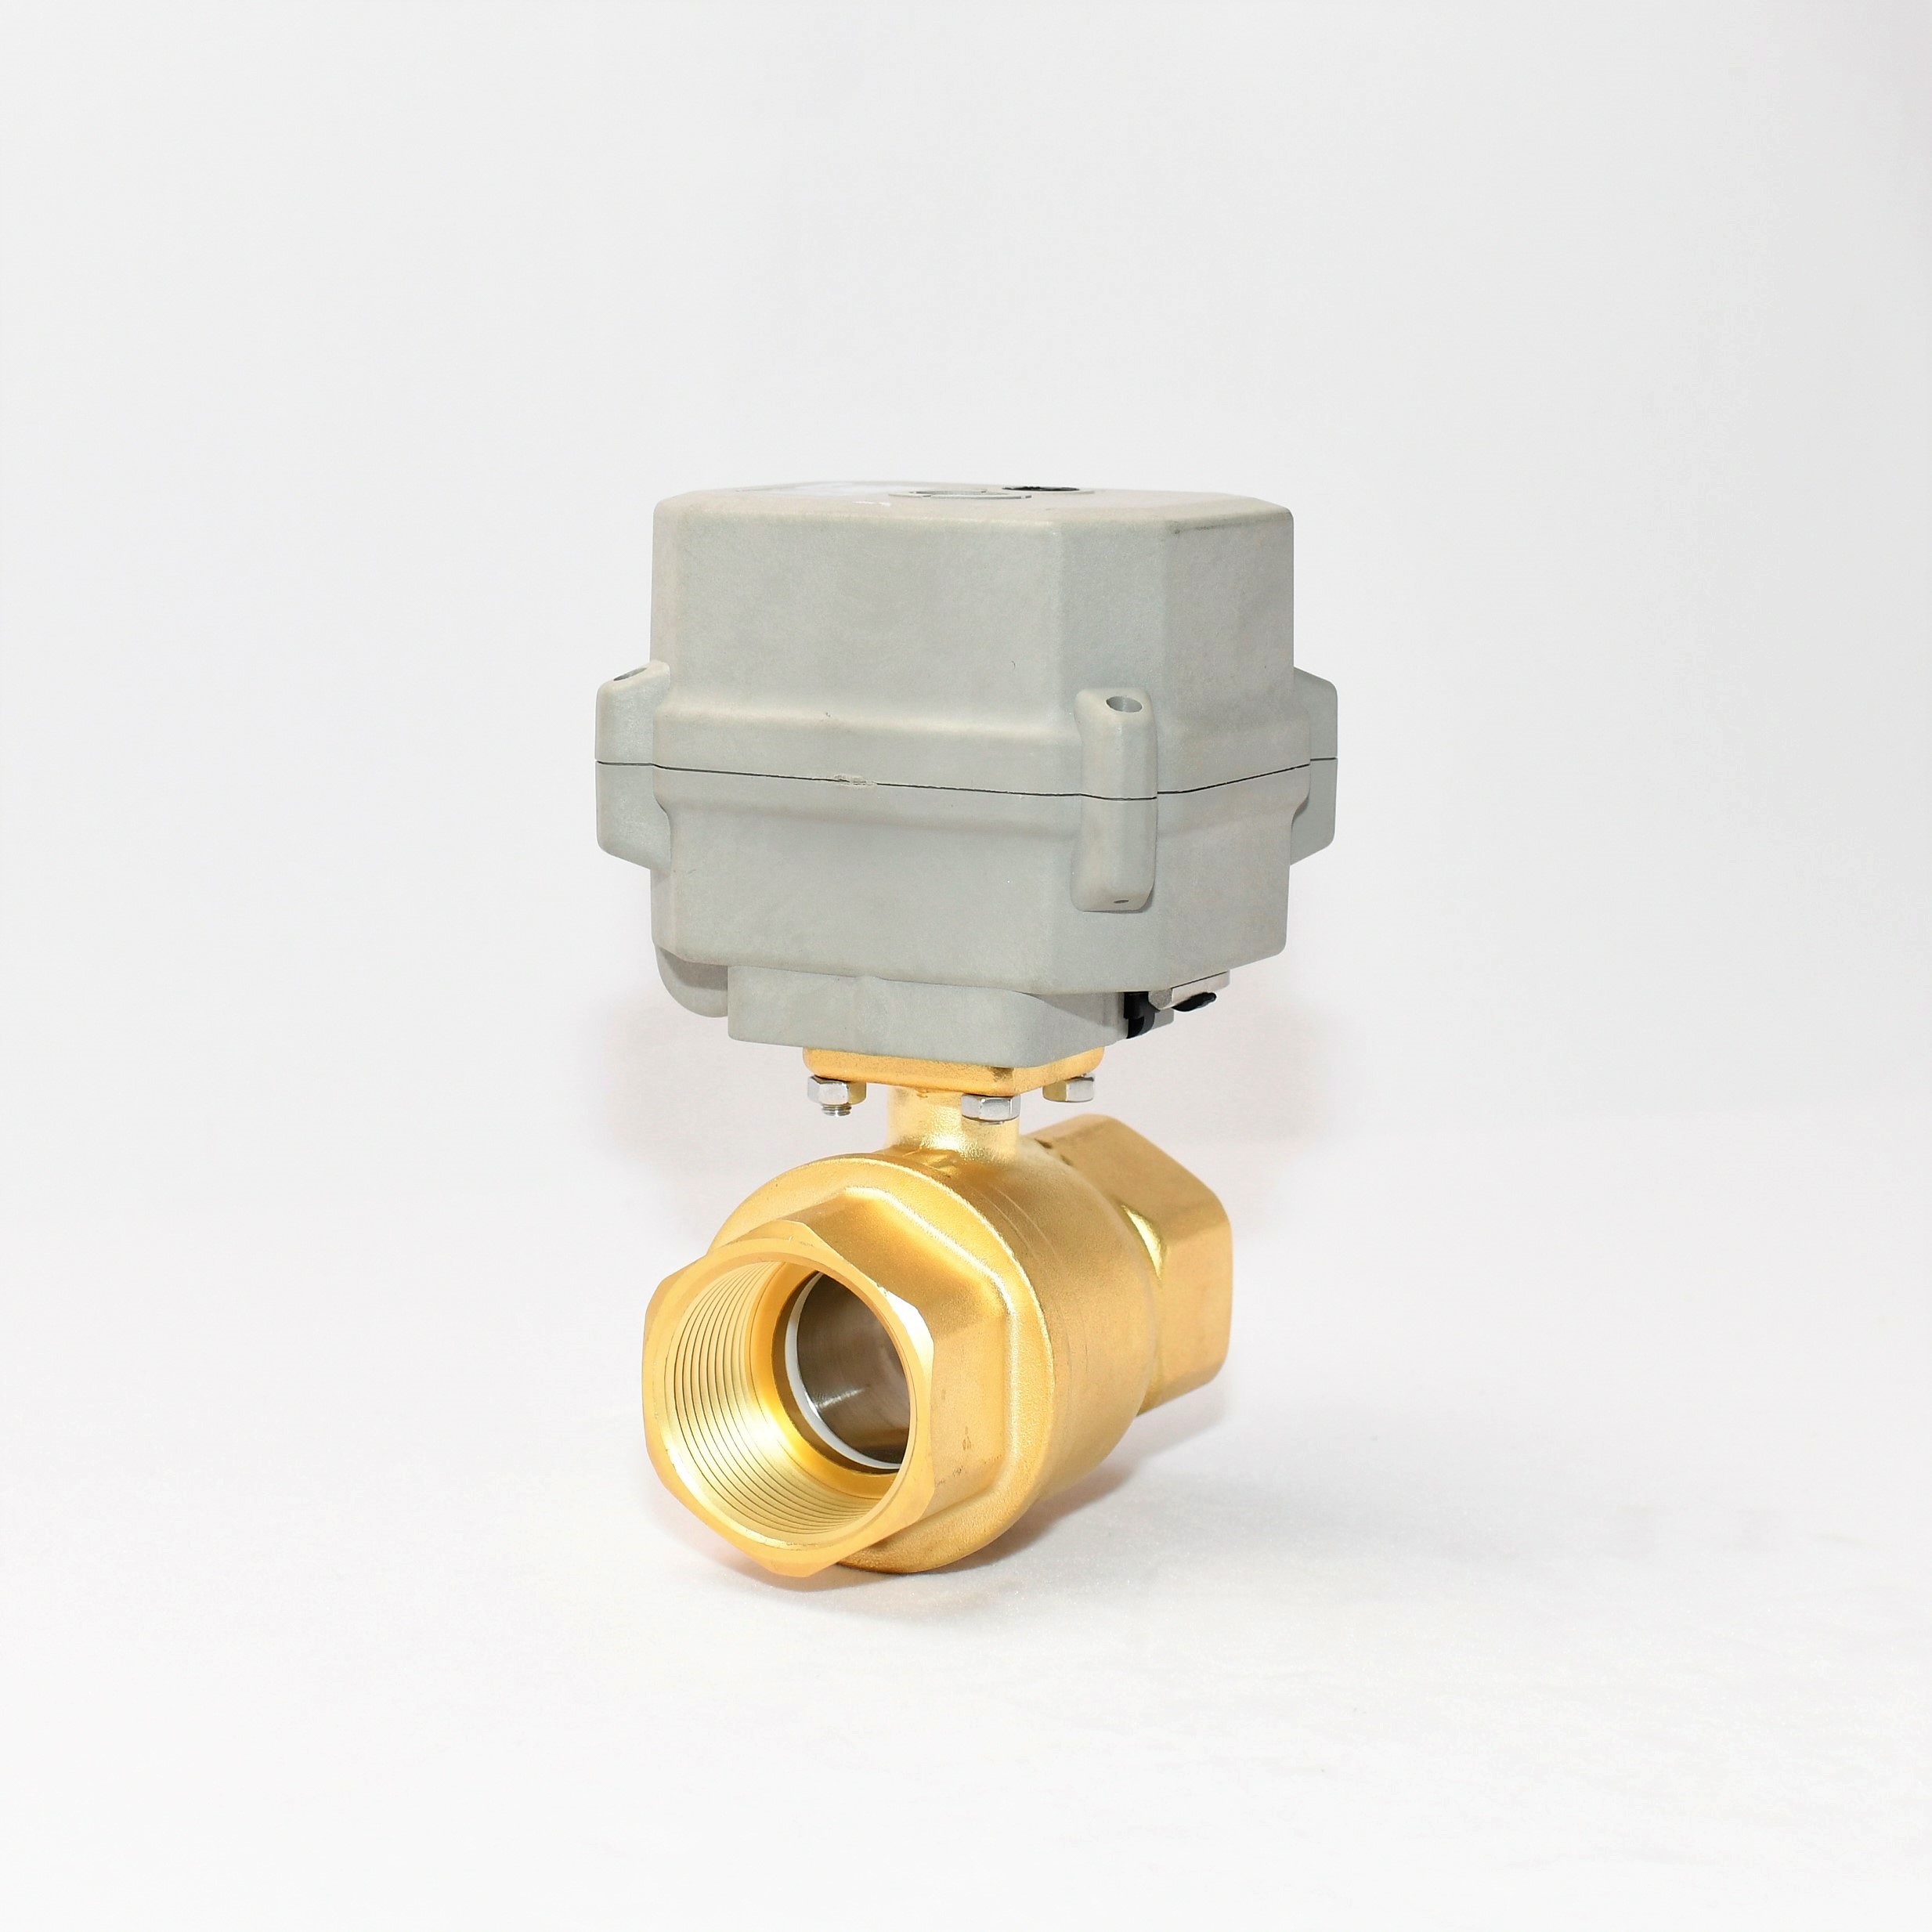 BACOENG 1 1/4 DN32 Brass BSP 2 Port Motorized Ball Valve AC110-230V CR202 2 Wires Normally Closed Electric Ball Valve 